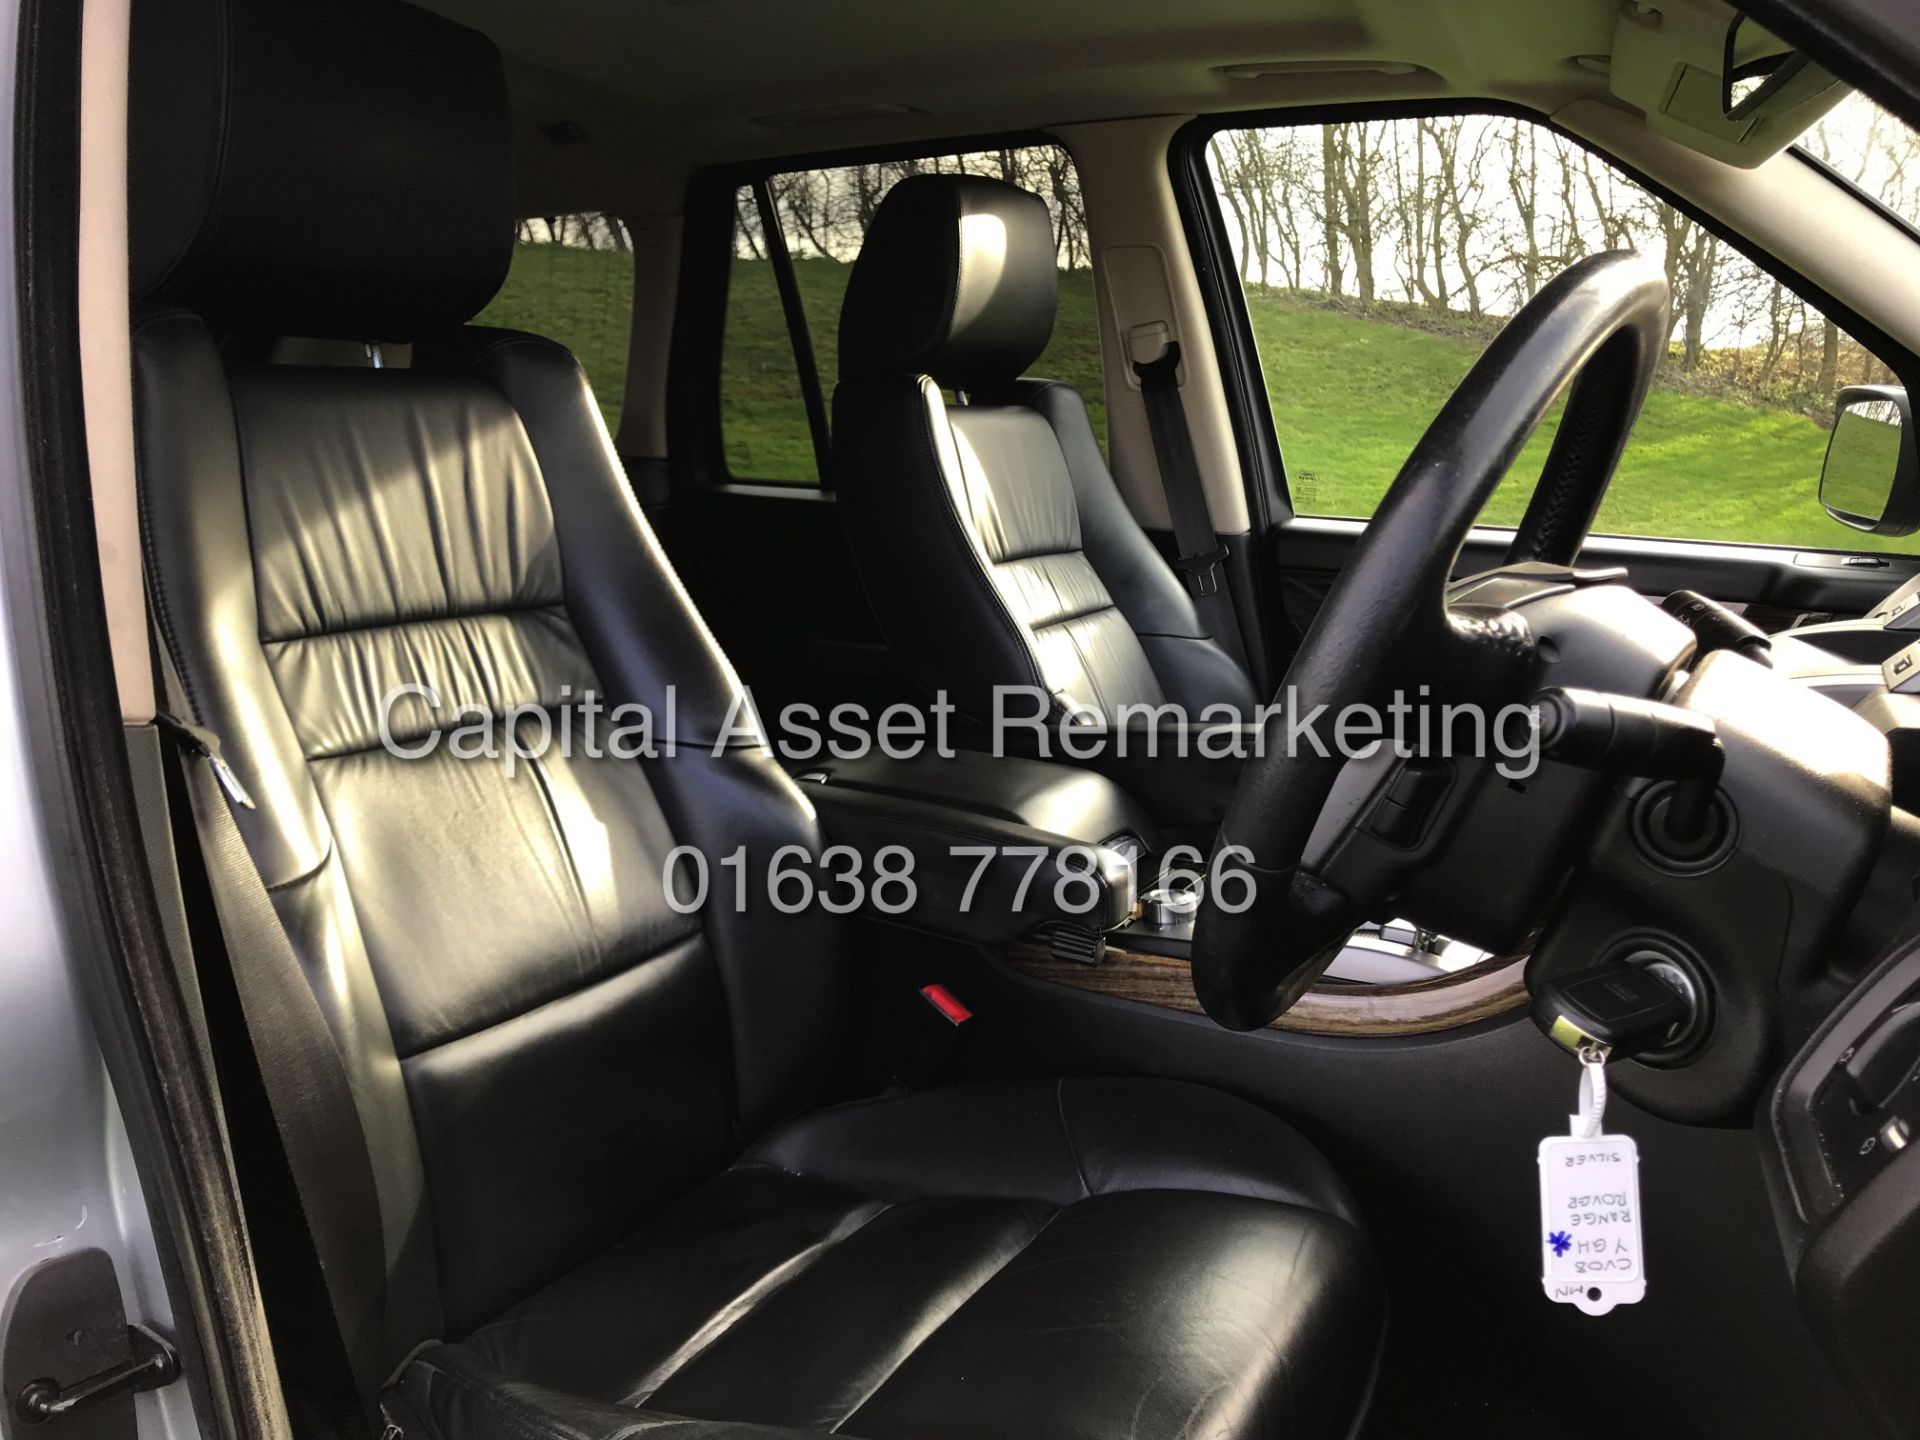 (ON SALE) RANGE ROVER SPORT 2.7TDV6 AUTO (08 REG) FULLY LOADED -SAT NAV -LEATHER-ELECTRIC EVERYTHING - Image 11 of 27